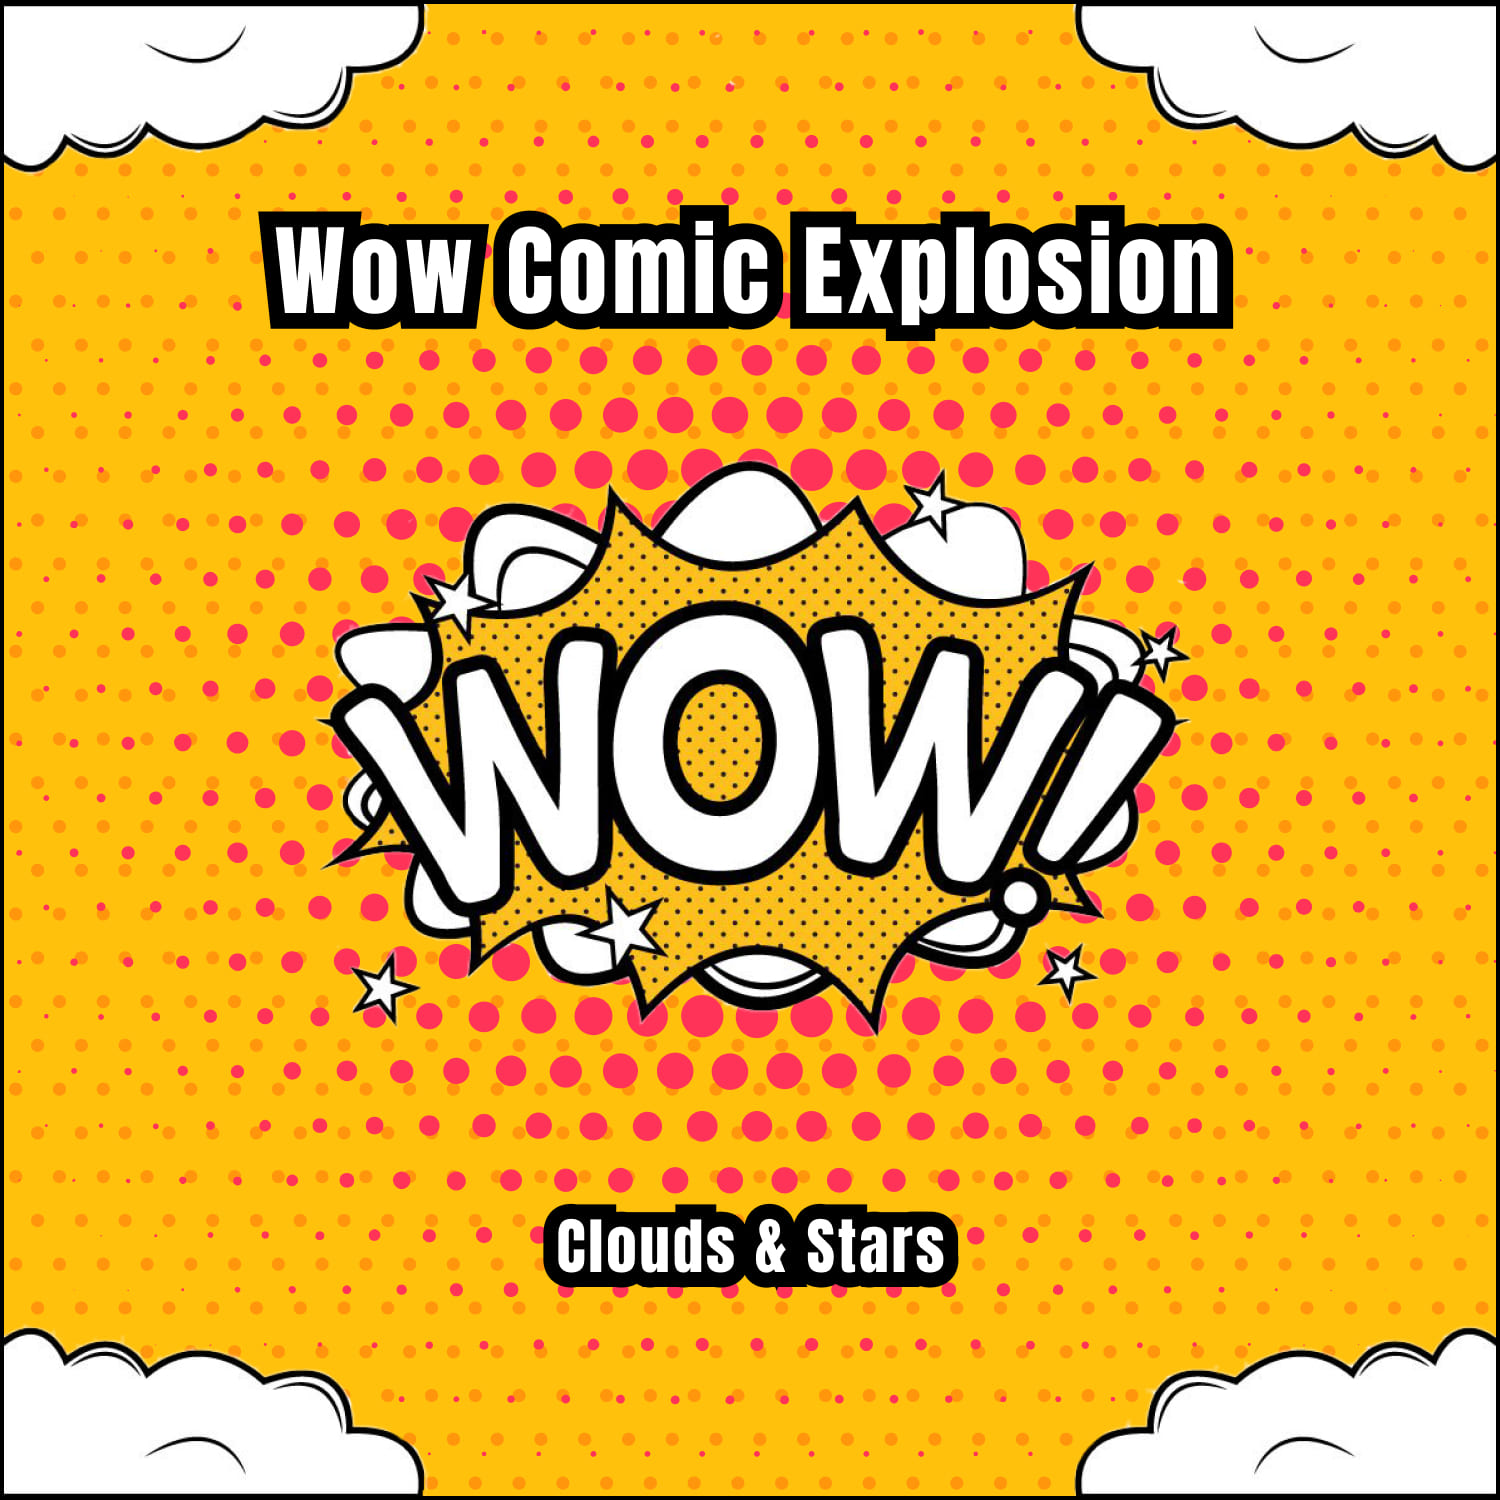 Wow Comic Explosion Clouds, Stars.